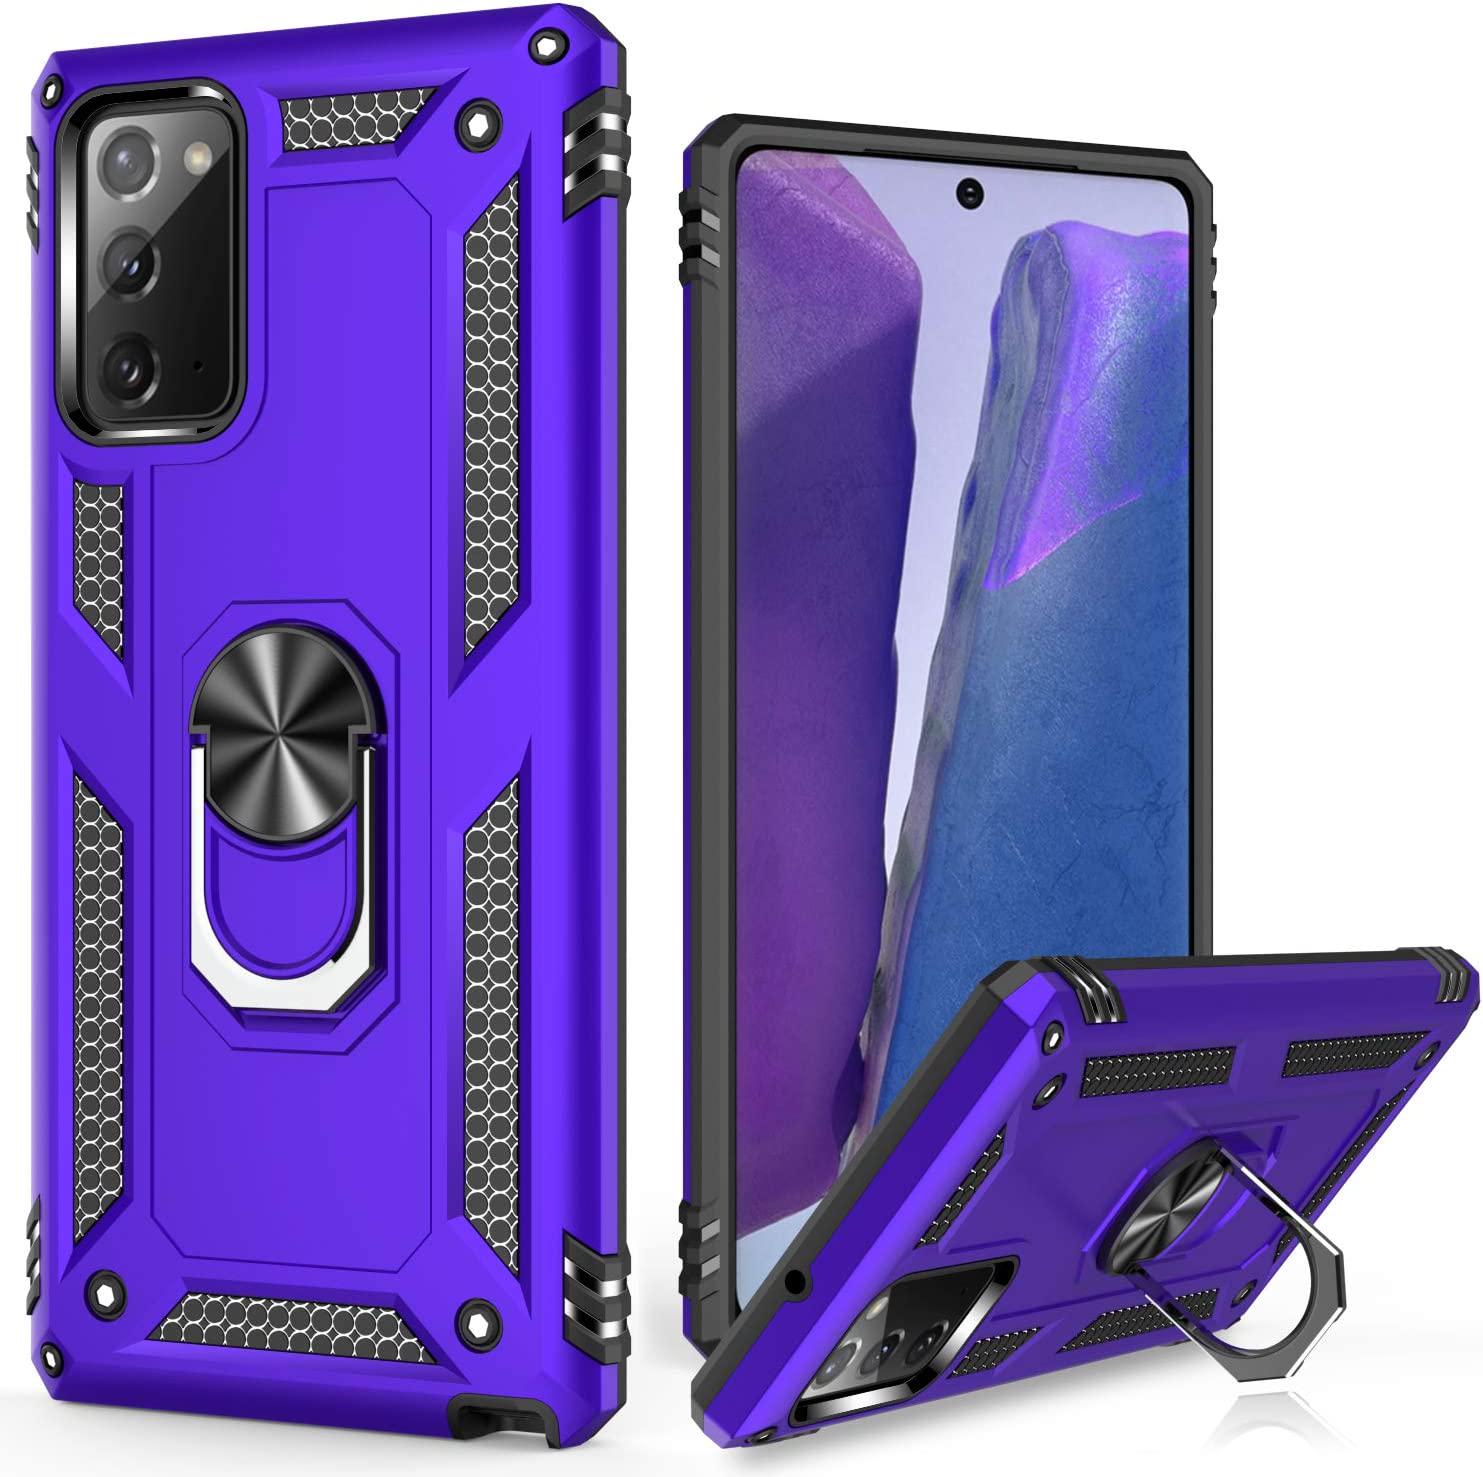 LUMARKE, LUMARKE Galaxy Note 20 Case,Pass 16ft Drop Test Military Grade Heavy Duty Cover with Magnetic Kickstand Compatible with Car Mount Holder,Protective Phone Case for Samsung Galaxy Note 20 Purple